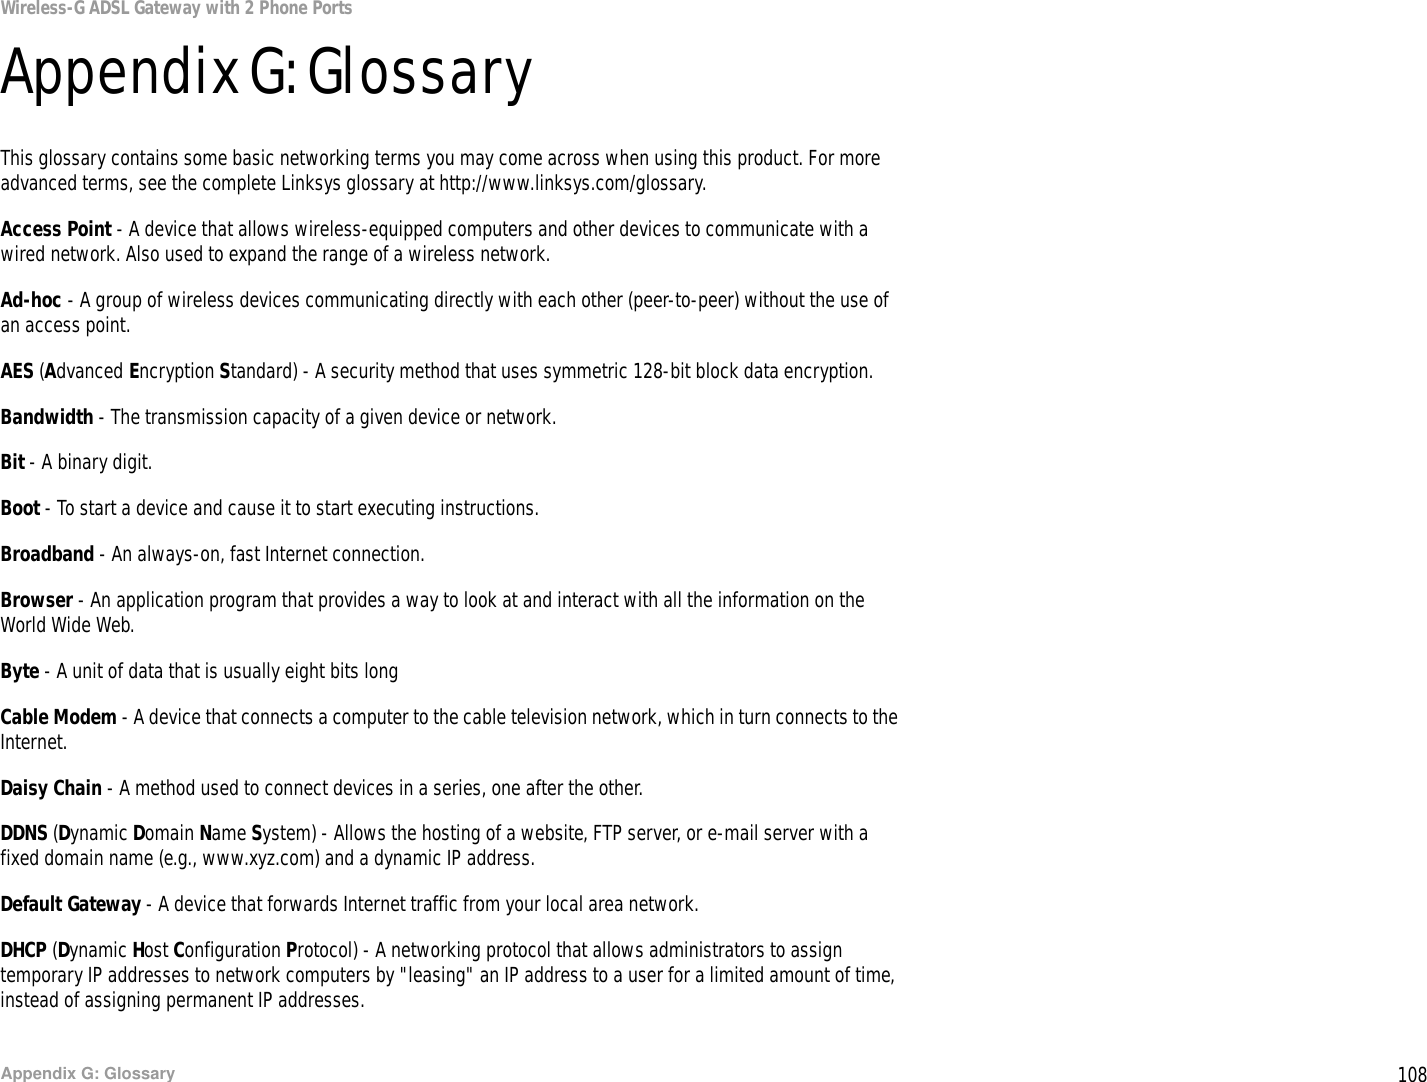 108Appendix G: GlossaryWireless-G ADSL Gateway with 2 Phone PortsAppendix G: GlossaryThis glossary contains some basic networking terms you may come across when using this product. For more advanced terms, see the complete Linksys glossary at http://www.linksys.com/glossary.Access Point - A device that allows wireless-equipped computers and other devices to communicate with a wired network. Also used to expand the range of a wireless network.Ad-hoc - A group of wireless devices communicating directly with each other (peer-to-peer) without the use of an access point.AES (Advanced Encryption Standard) - A security method that uses symmetric 128-bit block data encryption.Bandwidth - The transmission capacity of a given device or network.Bit - A binary digit.Boot - To start a device and cause it to start executing instructions.Broadband - An always-on, fast Internet connection.Browser - An application program that provides a way to look at and interact with all the information on the World Wide Web. Byte - A unit of data that is usually eight bits longCable Modem - A device that connects a computer to the cable television network, which in turn connects to the Internet.Daisy Chain - A method used to connect devices in a series, one after the other.DDNS (Dynamic Domain Name System) - Allows the hosting of a website, FTP server, or e-mail server with a fixed domain name (e.g., www.xyz.com) and a dynamic IP address.Default Gateway - A device that forwards Internet traffic from your local area network.DHCP (Dynamic Host Configuration Protocol) - A networking protocol that allows administrators to assign temporary IP addresses to network computers by &quot;leasing&quot; an IP address to a user for a limited amount of time, instead of assigning permanent IP addresses.